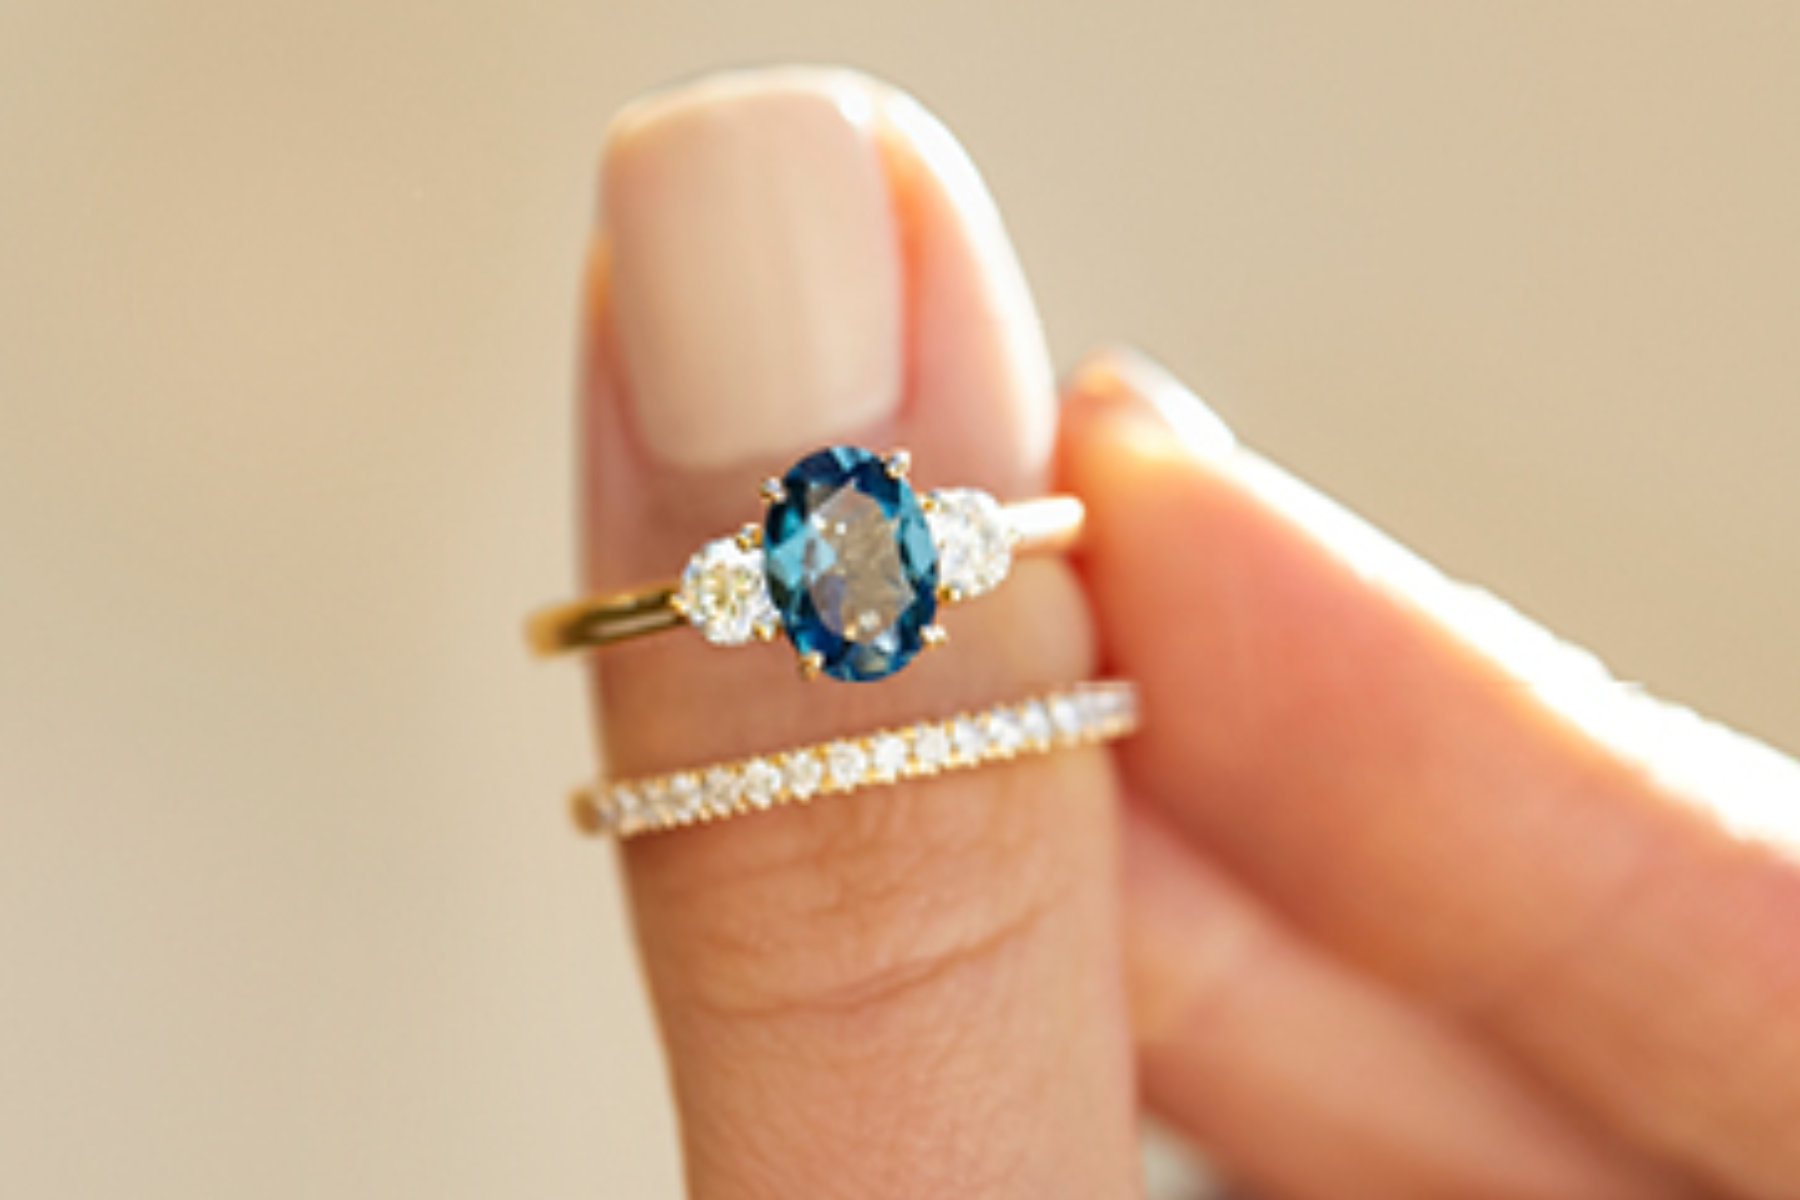 An engagement ring featuring a blue gemstone on a woman's finge